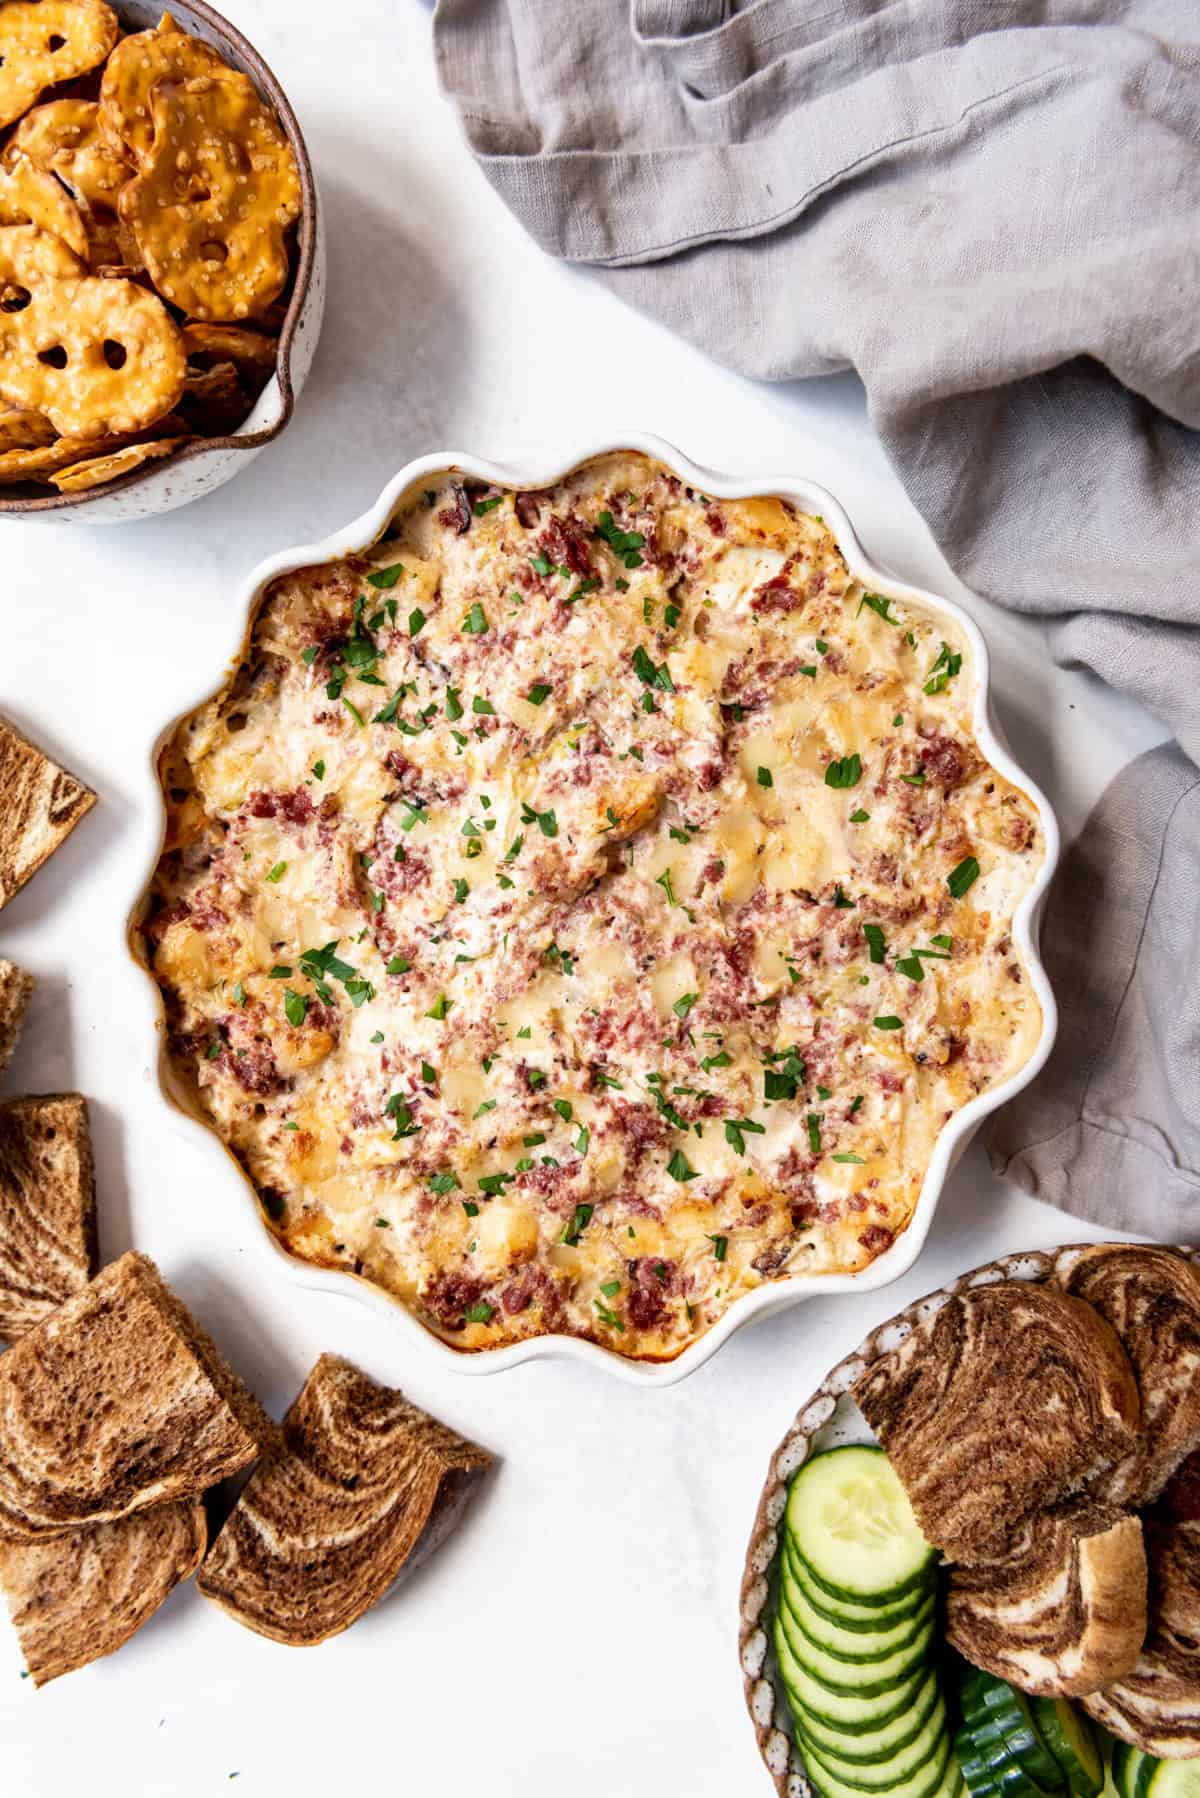 An overhead image of baked reuben dip surrounded by pretzels, sliced cucumbers, and pieces of rye bread cut into squares.